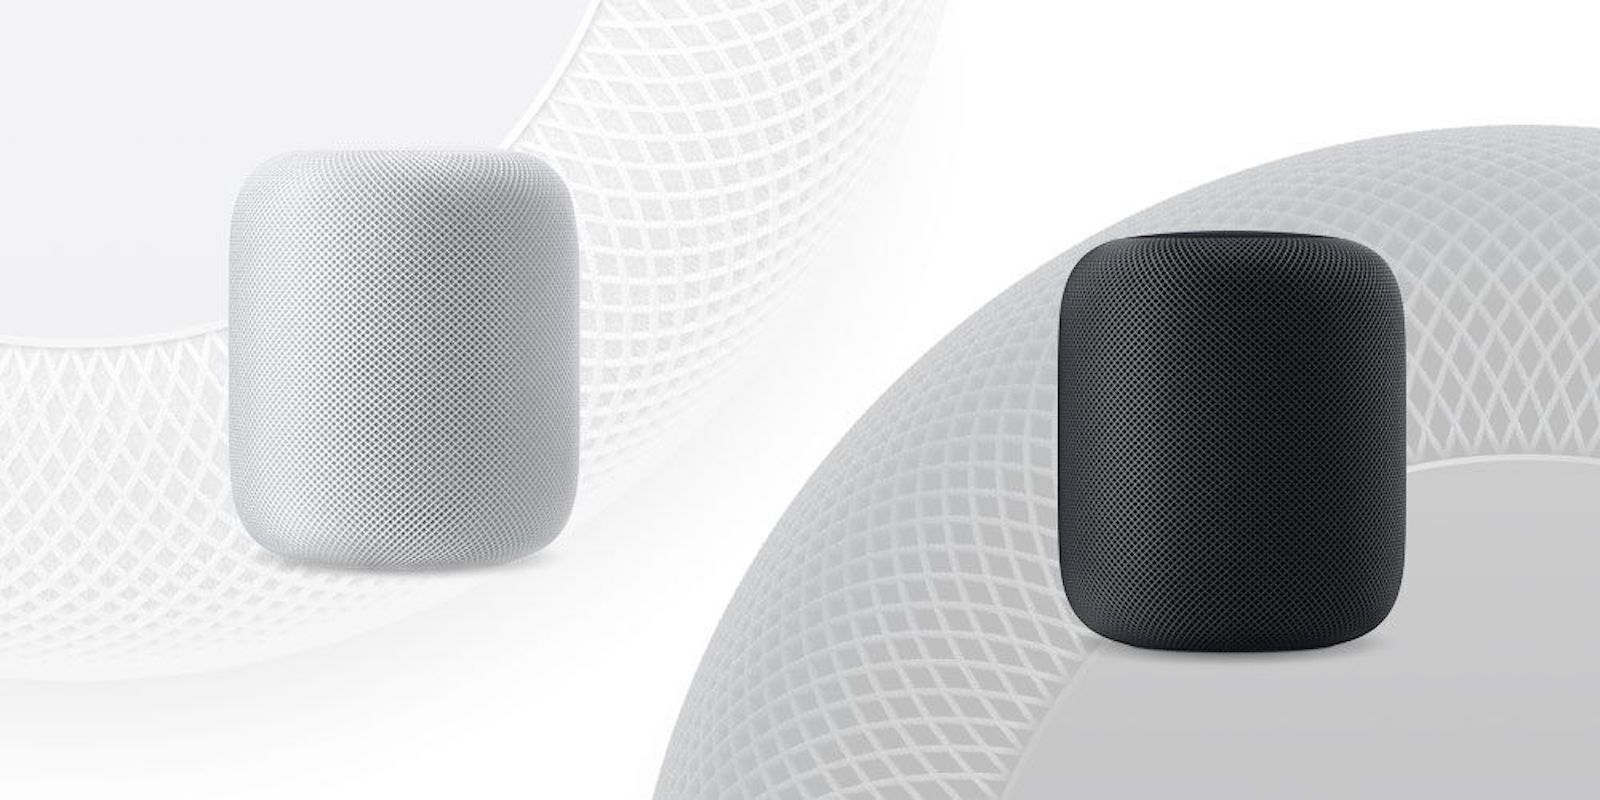 HomePod makes a great addition to any home, and now you can get one at a nice discount.